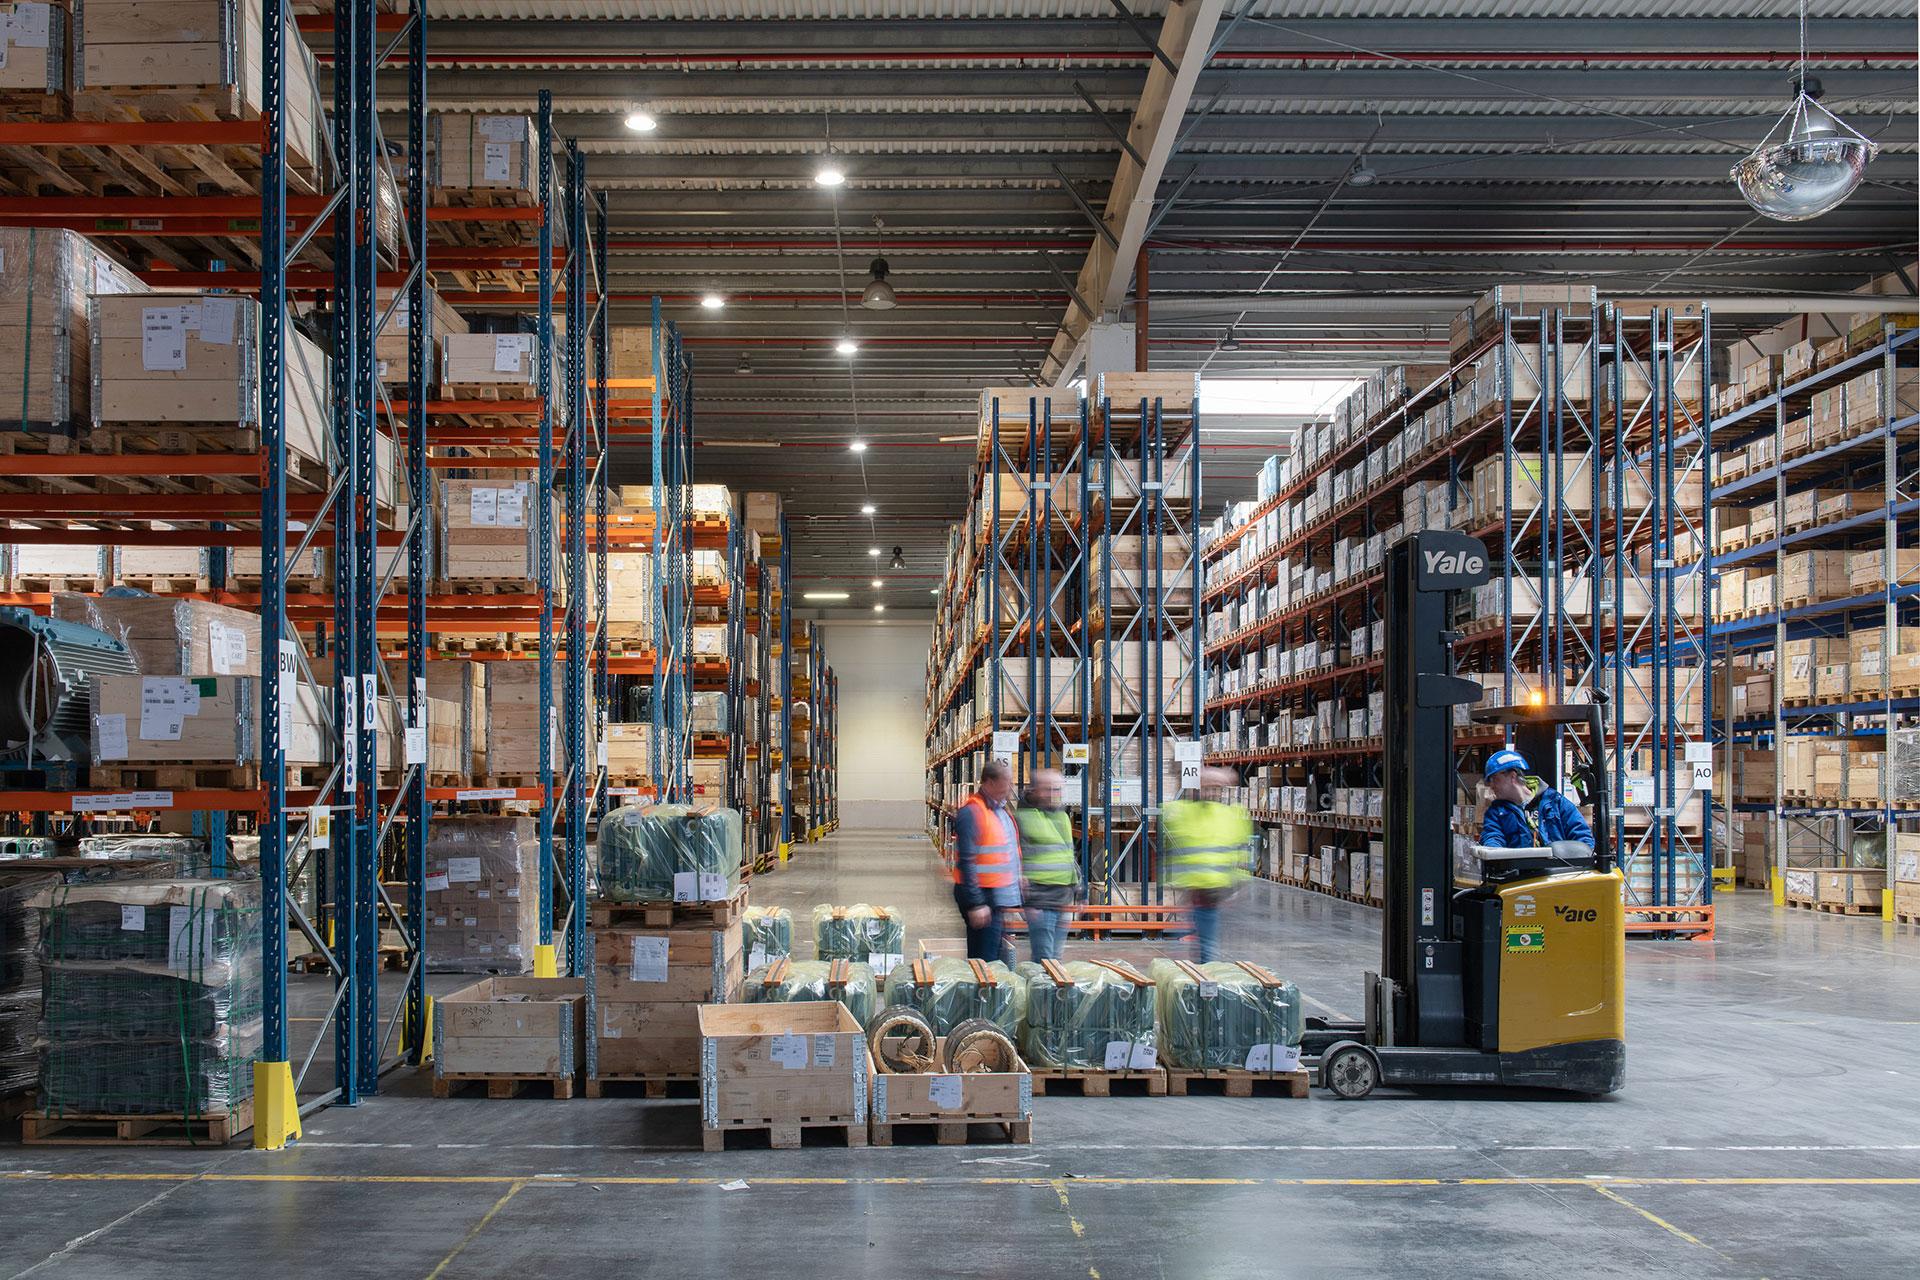 INDU BAY luminaire ensures excellent visibility so workers can easily identify parcels in the warehouse